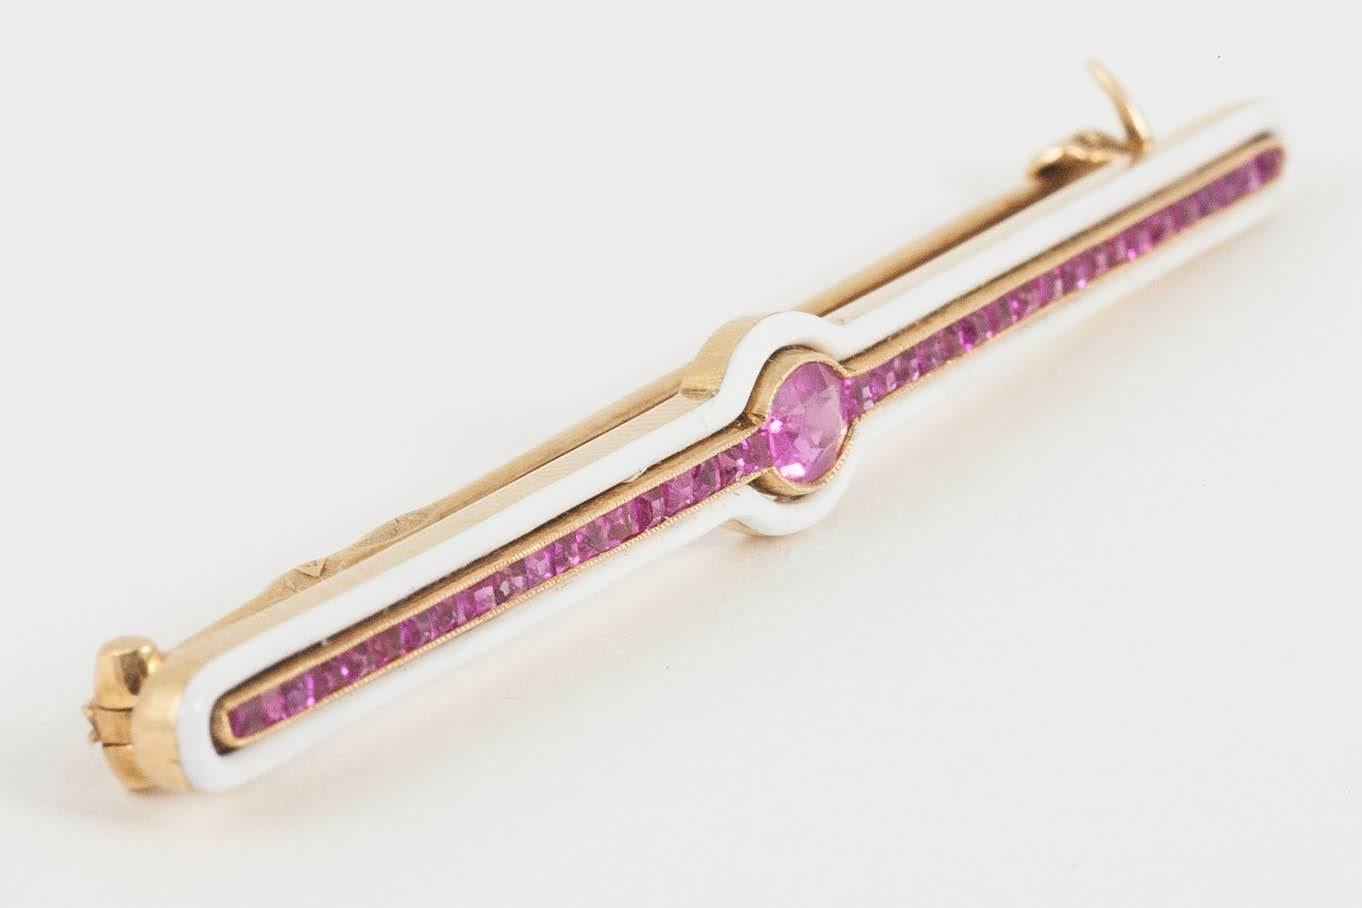 A 14kt yellow gold brooch of bar shape,set with burma rubies,surrounded with white enamel.Russian marked c,1910